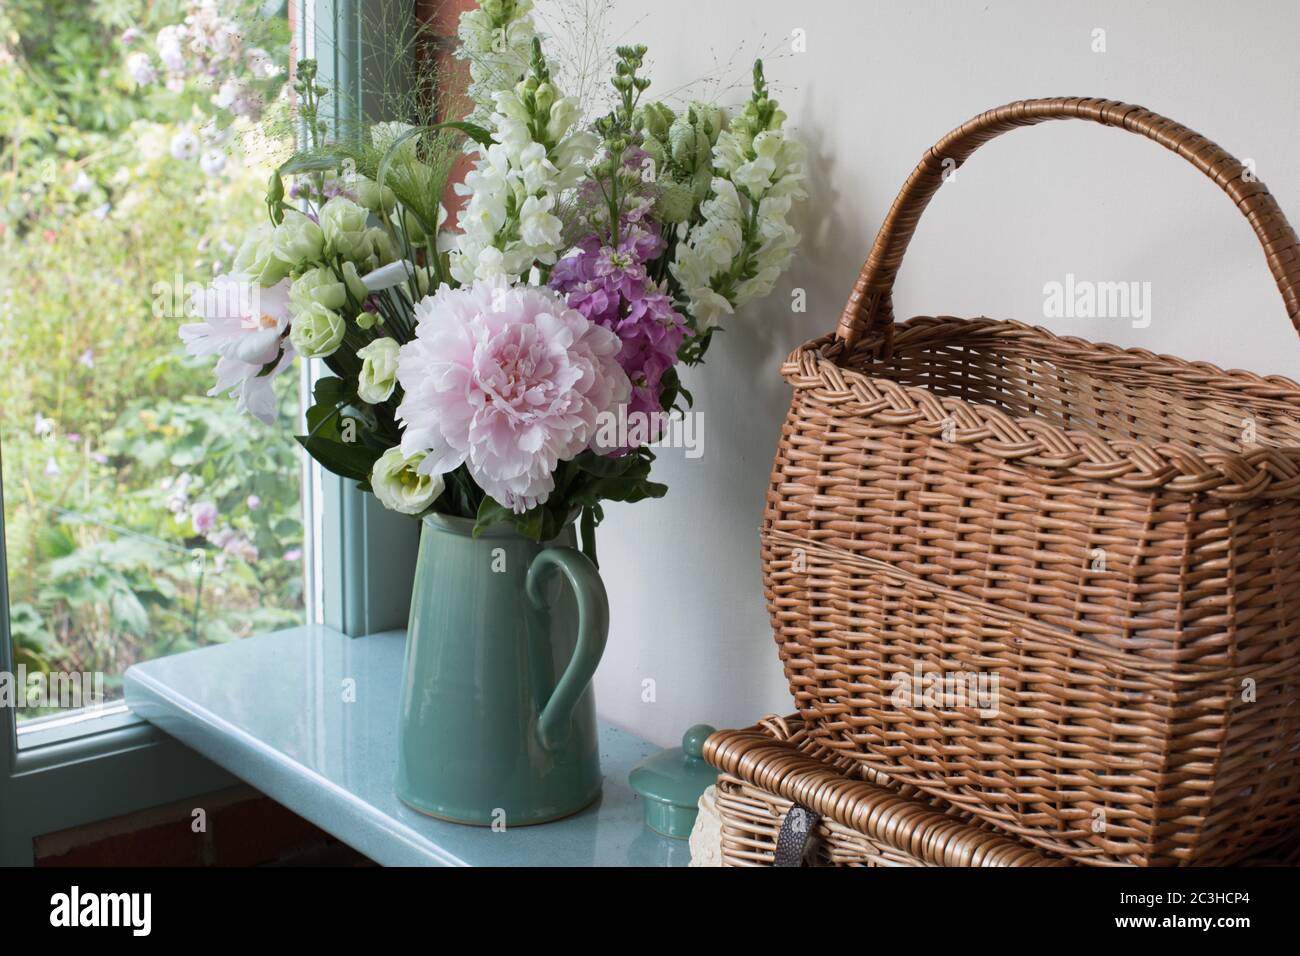 Peonies, lisianthus, stocks, panicum grass and snap dragons in blue green ceramic jug next to a willow basket on a windowsill Stock Photo